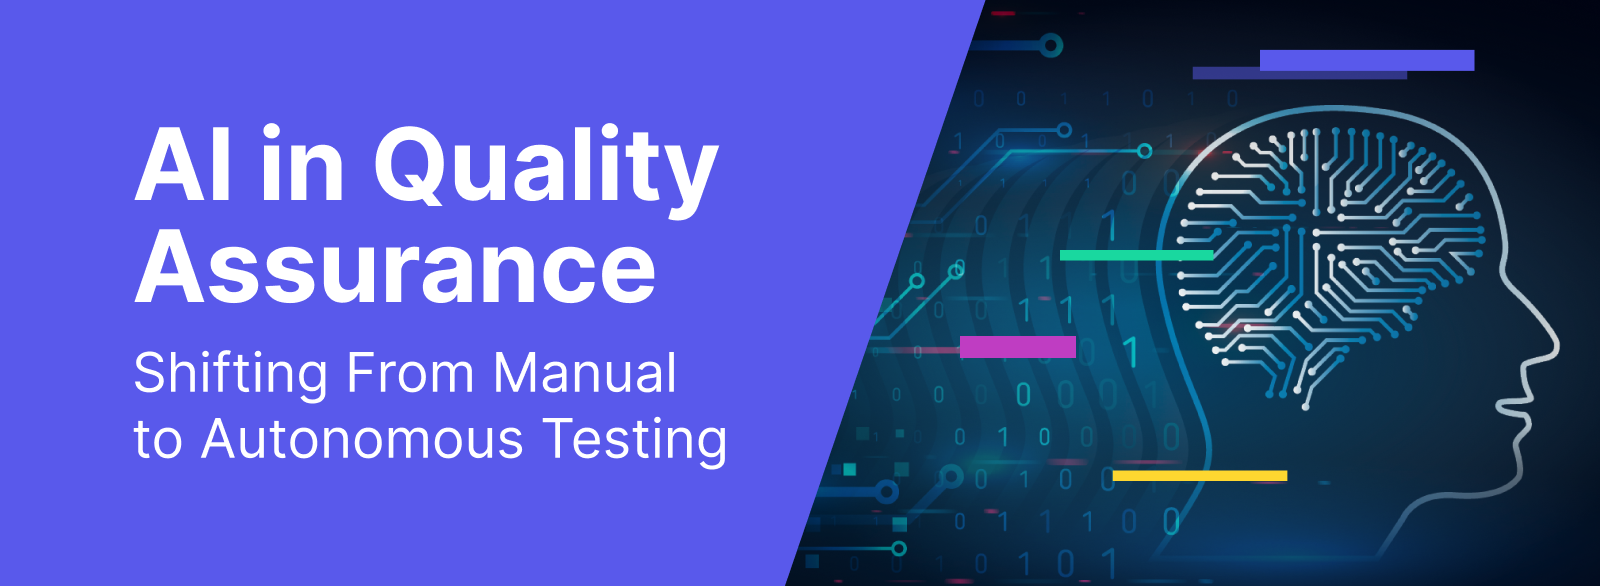 AI in Quality Assurance featured image